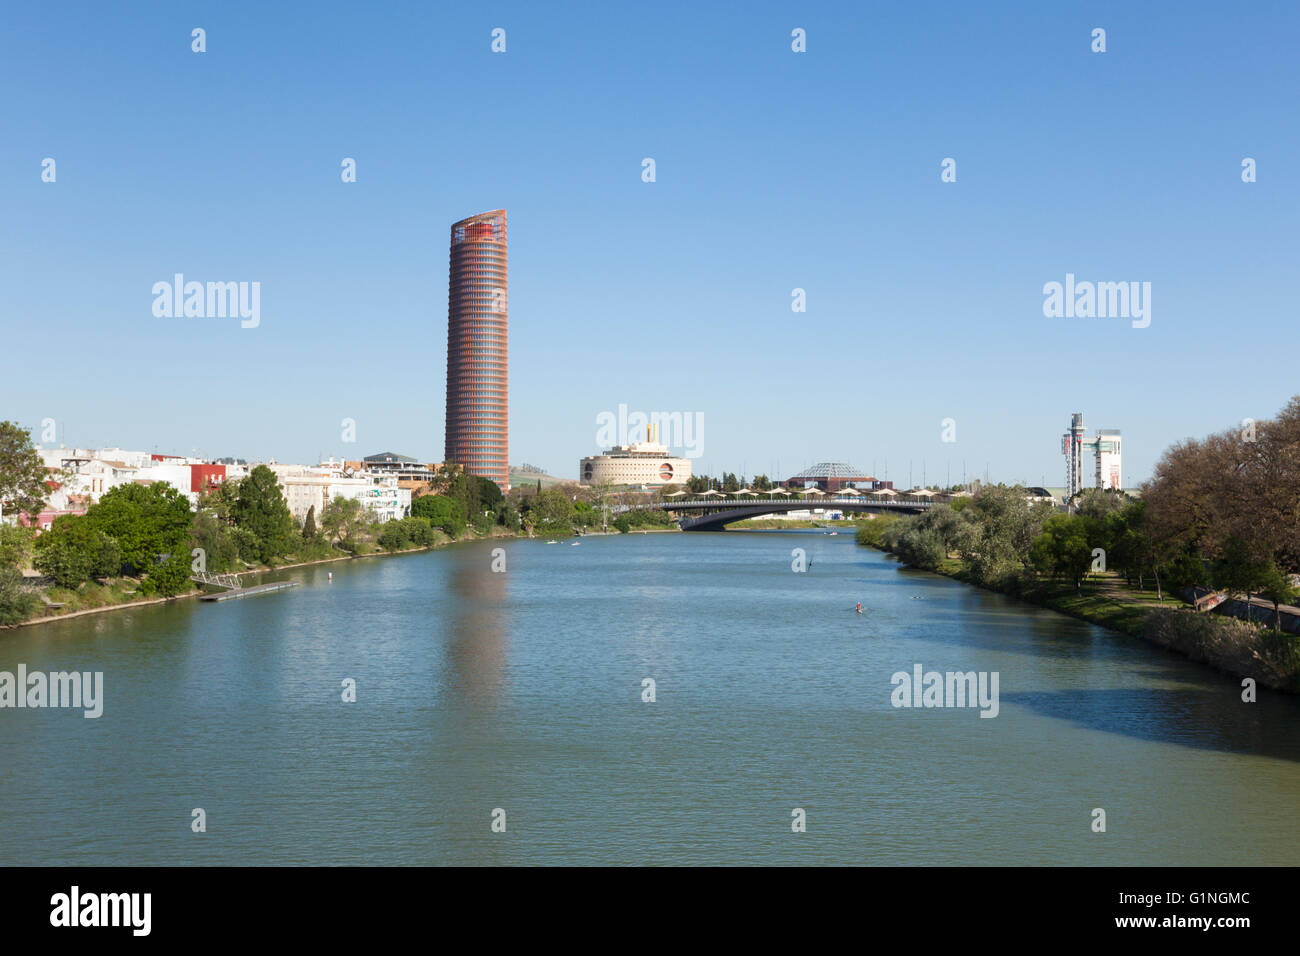 Guadalquivir river at Seville with Sevilla Tower, Torre Triana Puente del Cachorro and Schindler Tower Stock Photo